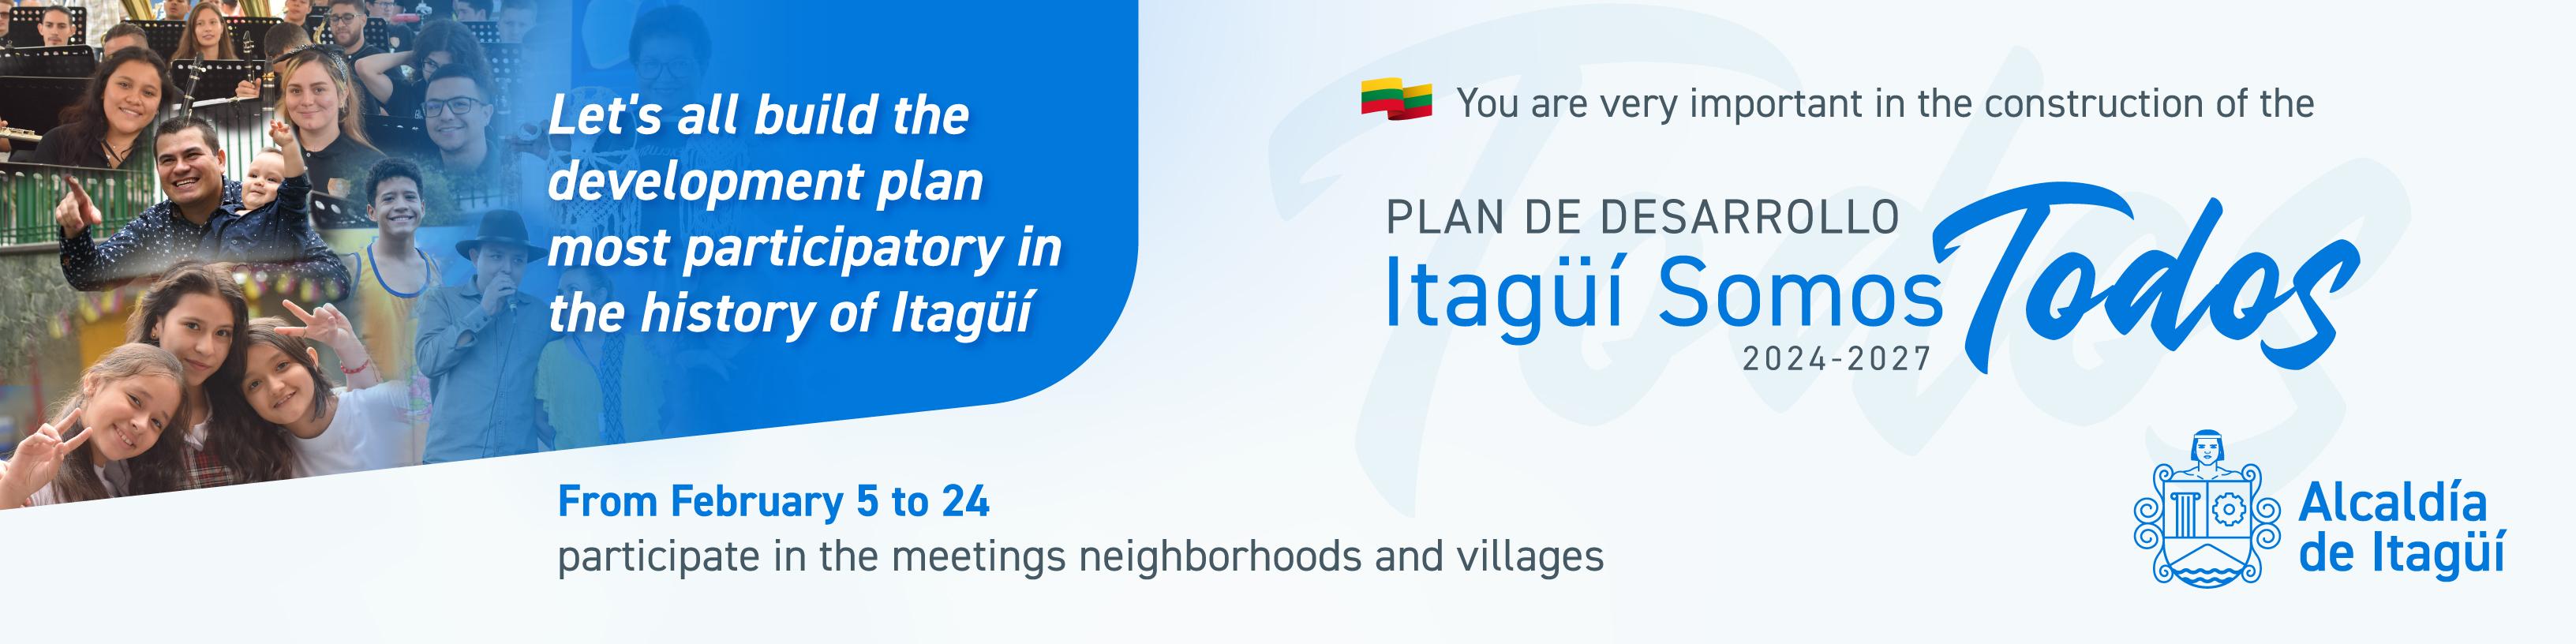 Let's all build the most participatory development plan in the history of Itagüí